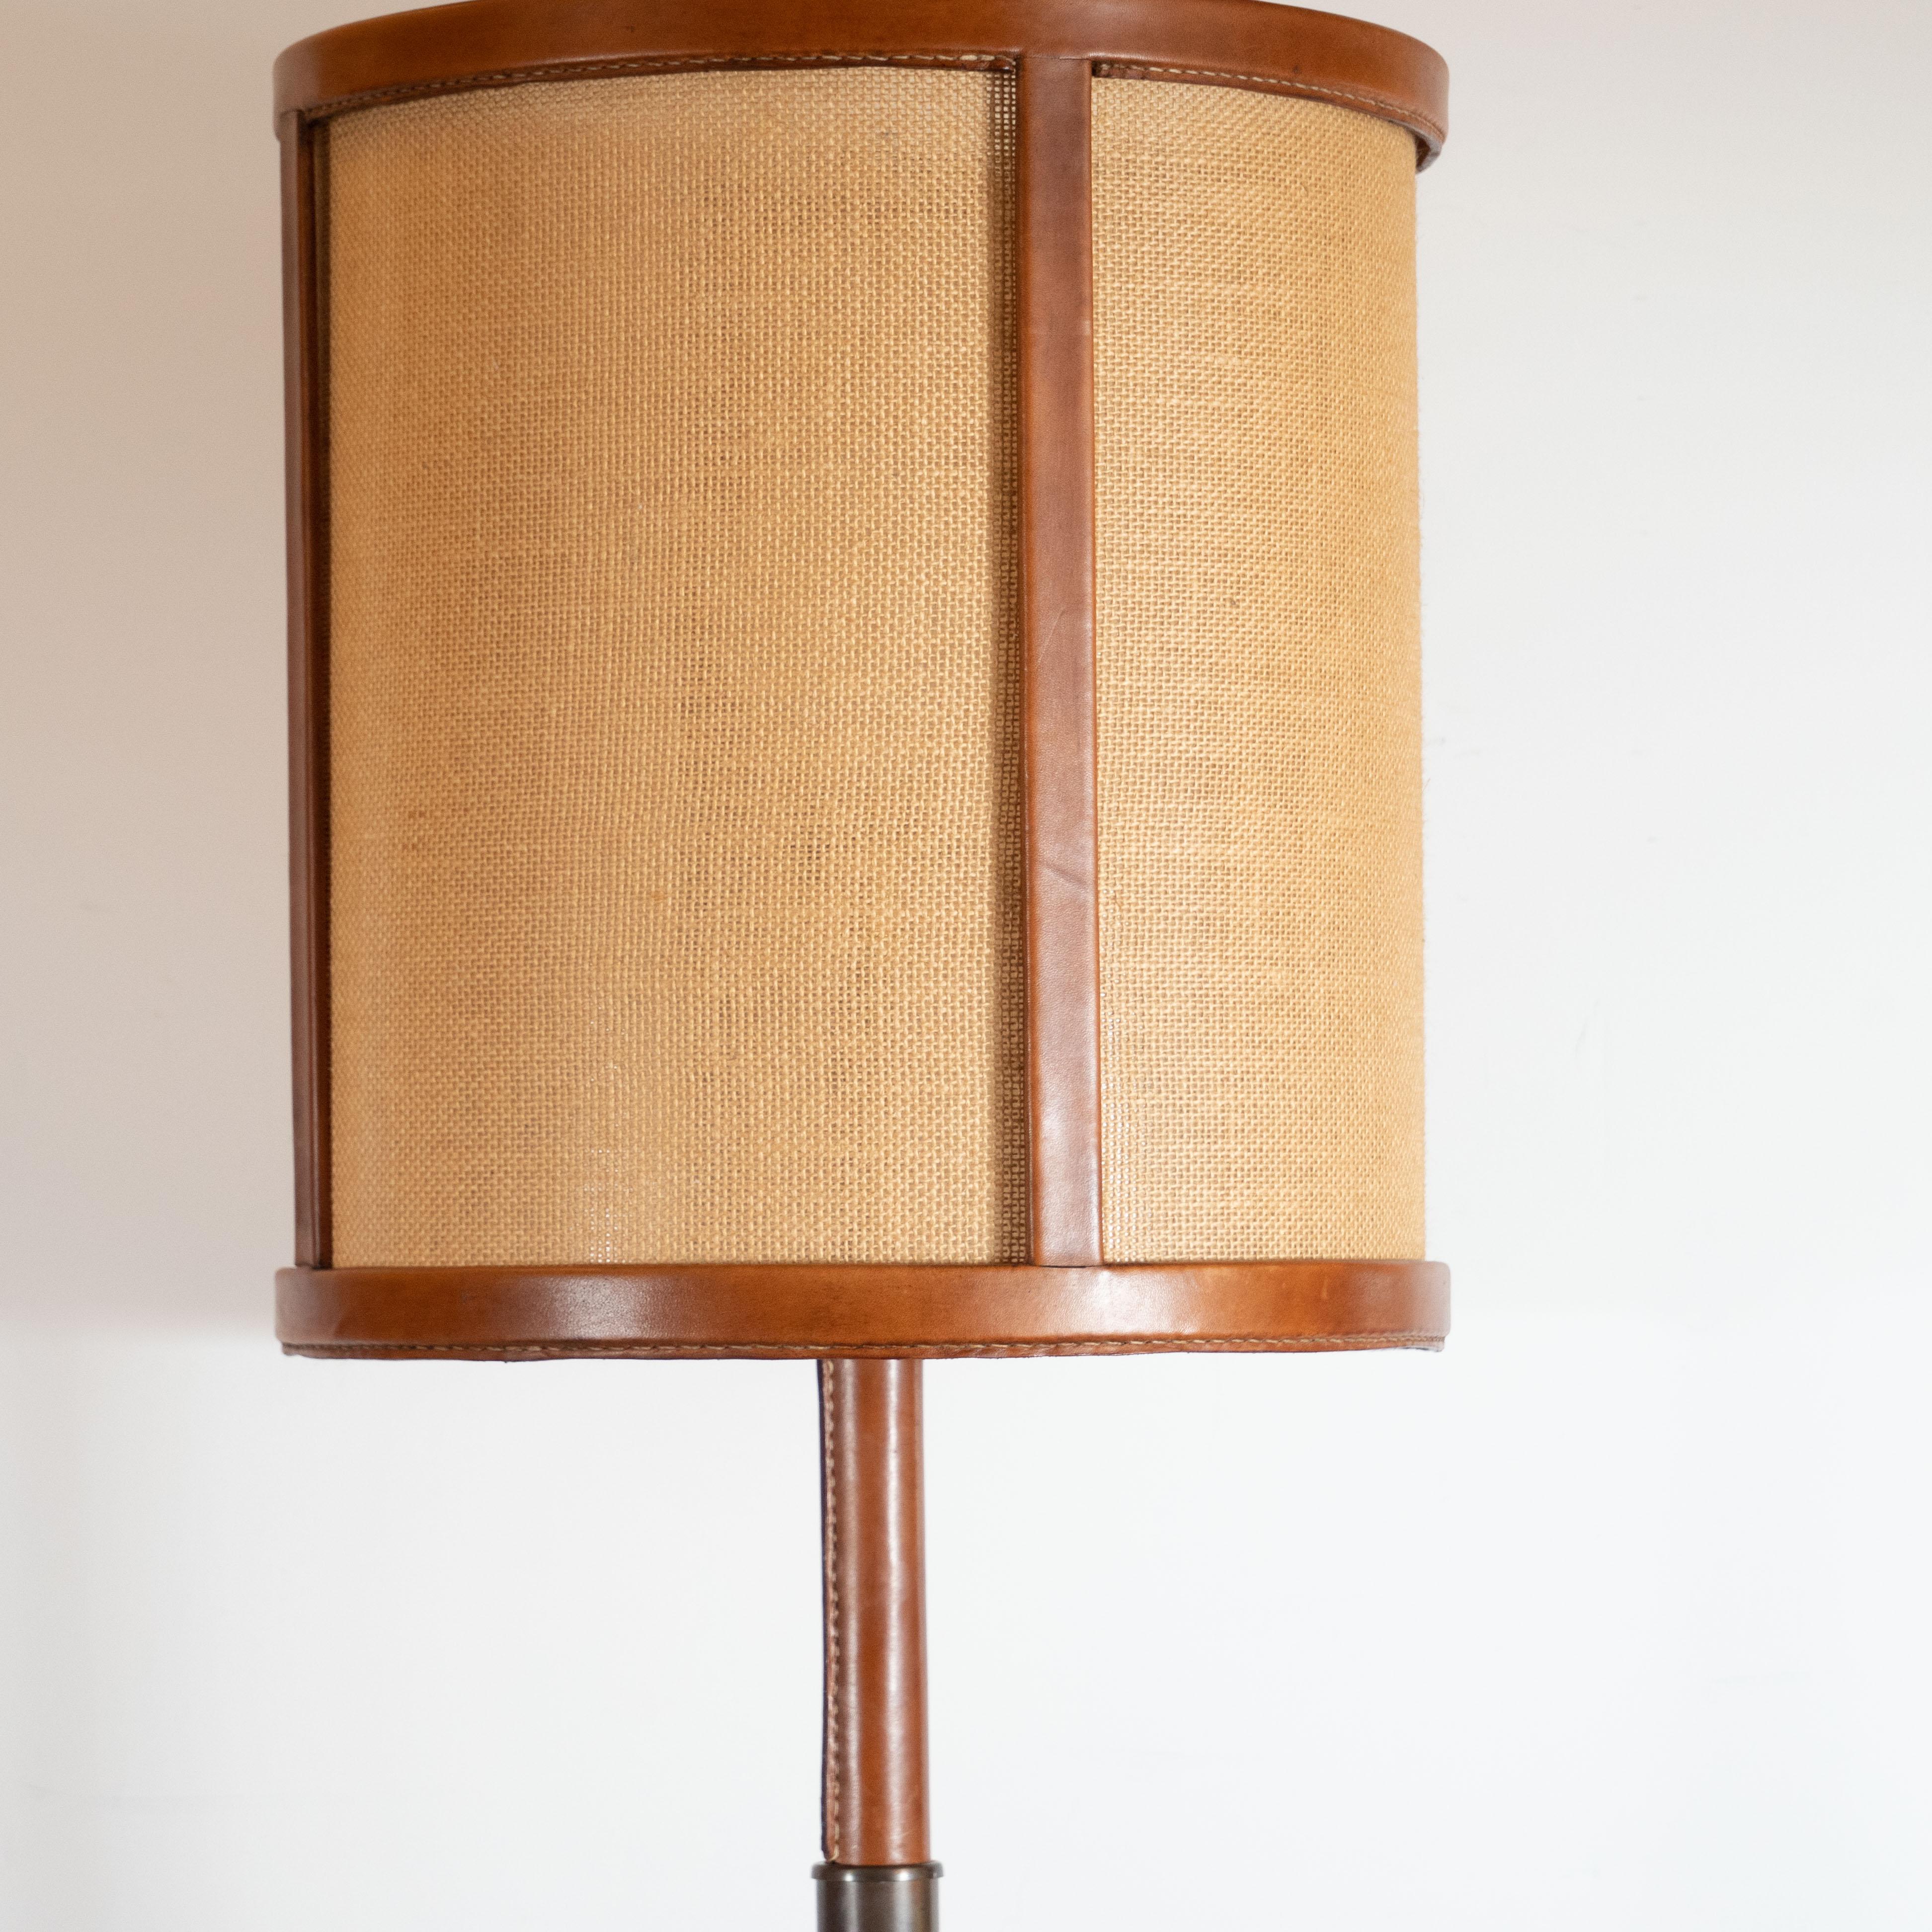 This sophisticated Mid-Century Modern floor lamp was designed in France, circa 1950. It features a bronze circular base with a cylindrical body ascending from the center. The lower portion of the body is bronze, while the majority of the cylindrical